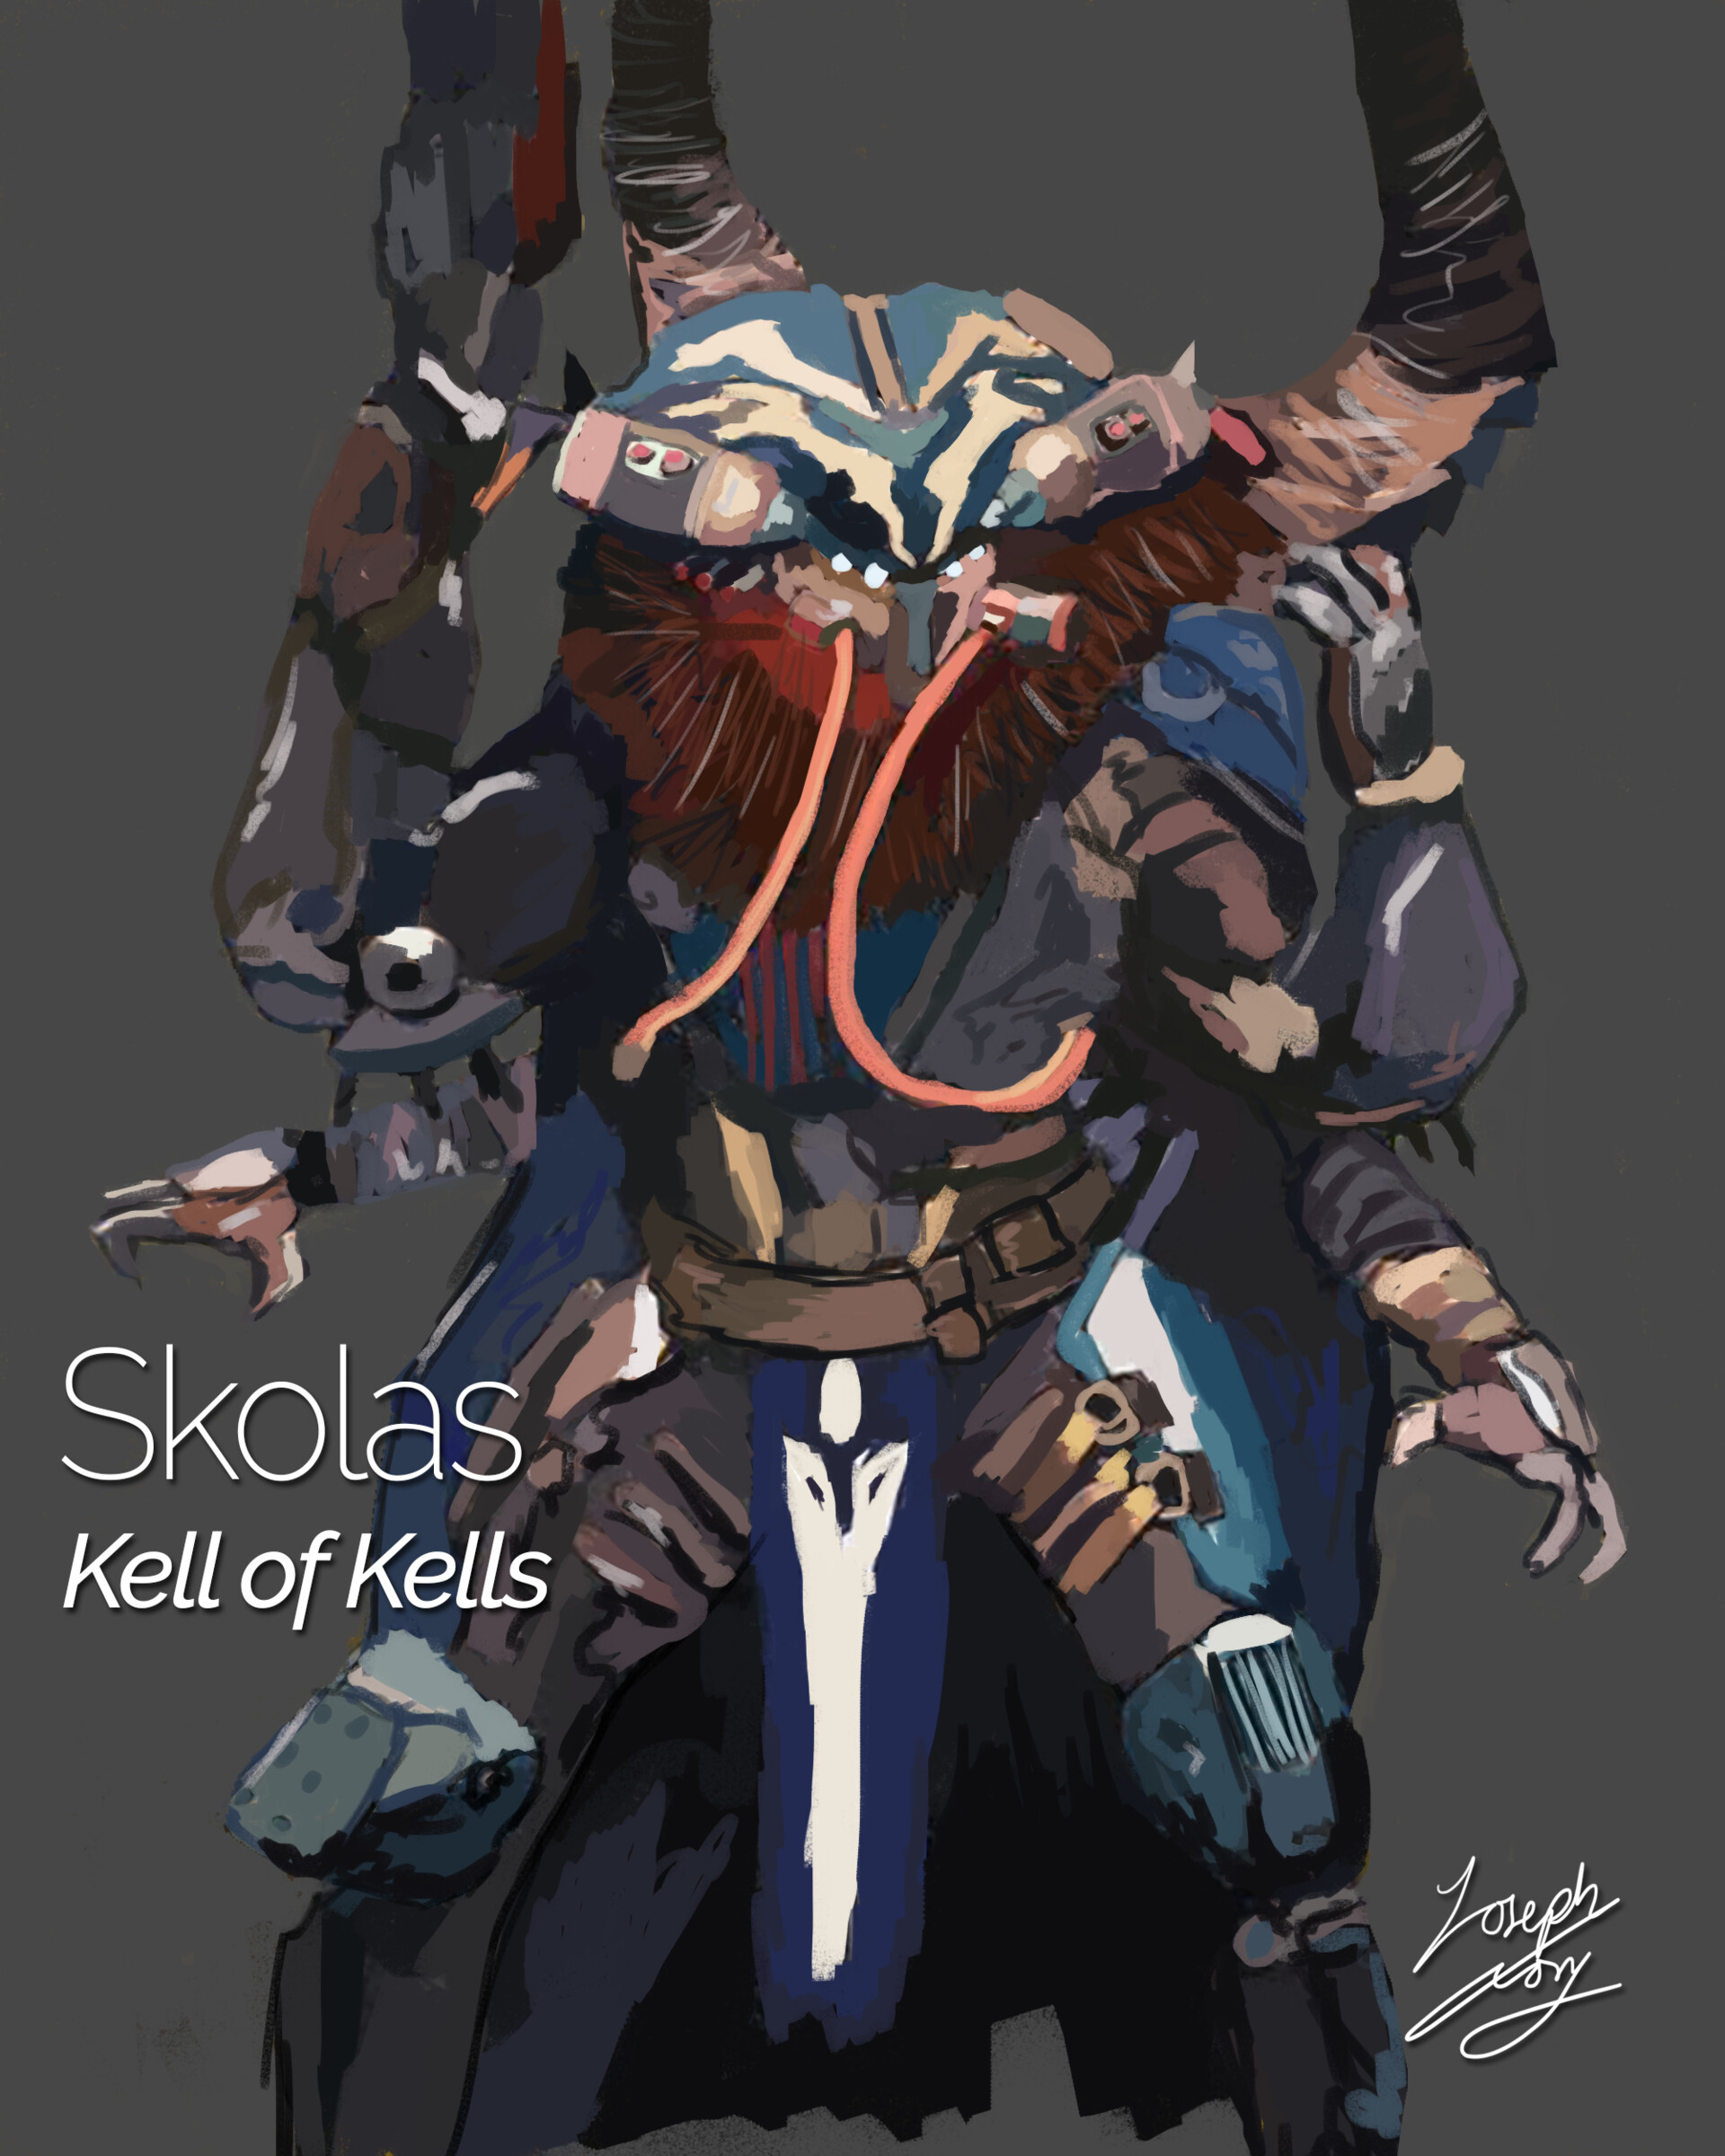 Skolas the Kell of Kells cosplay submitted by Titan Spitfire > Community